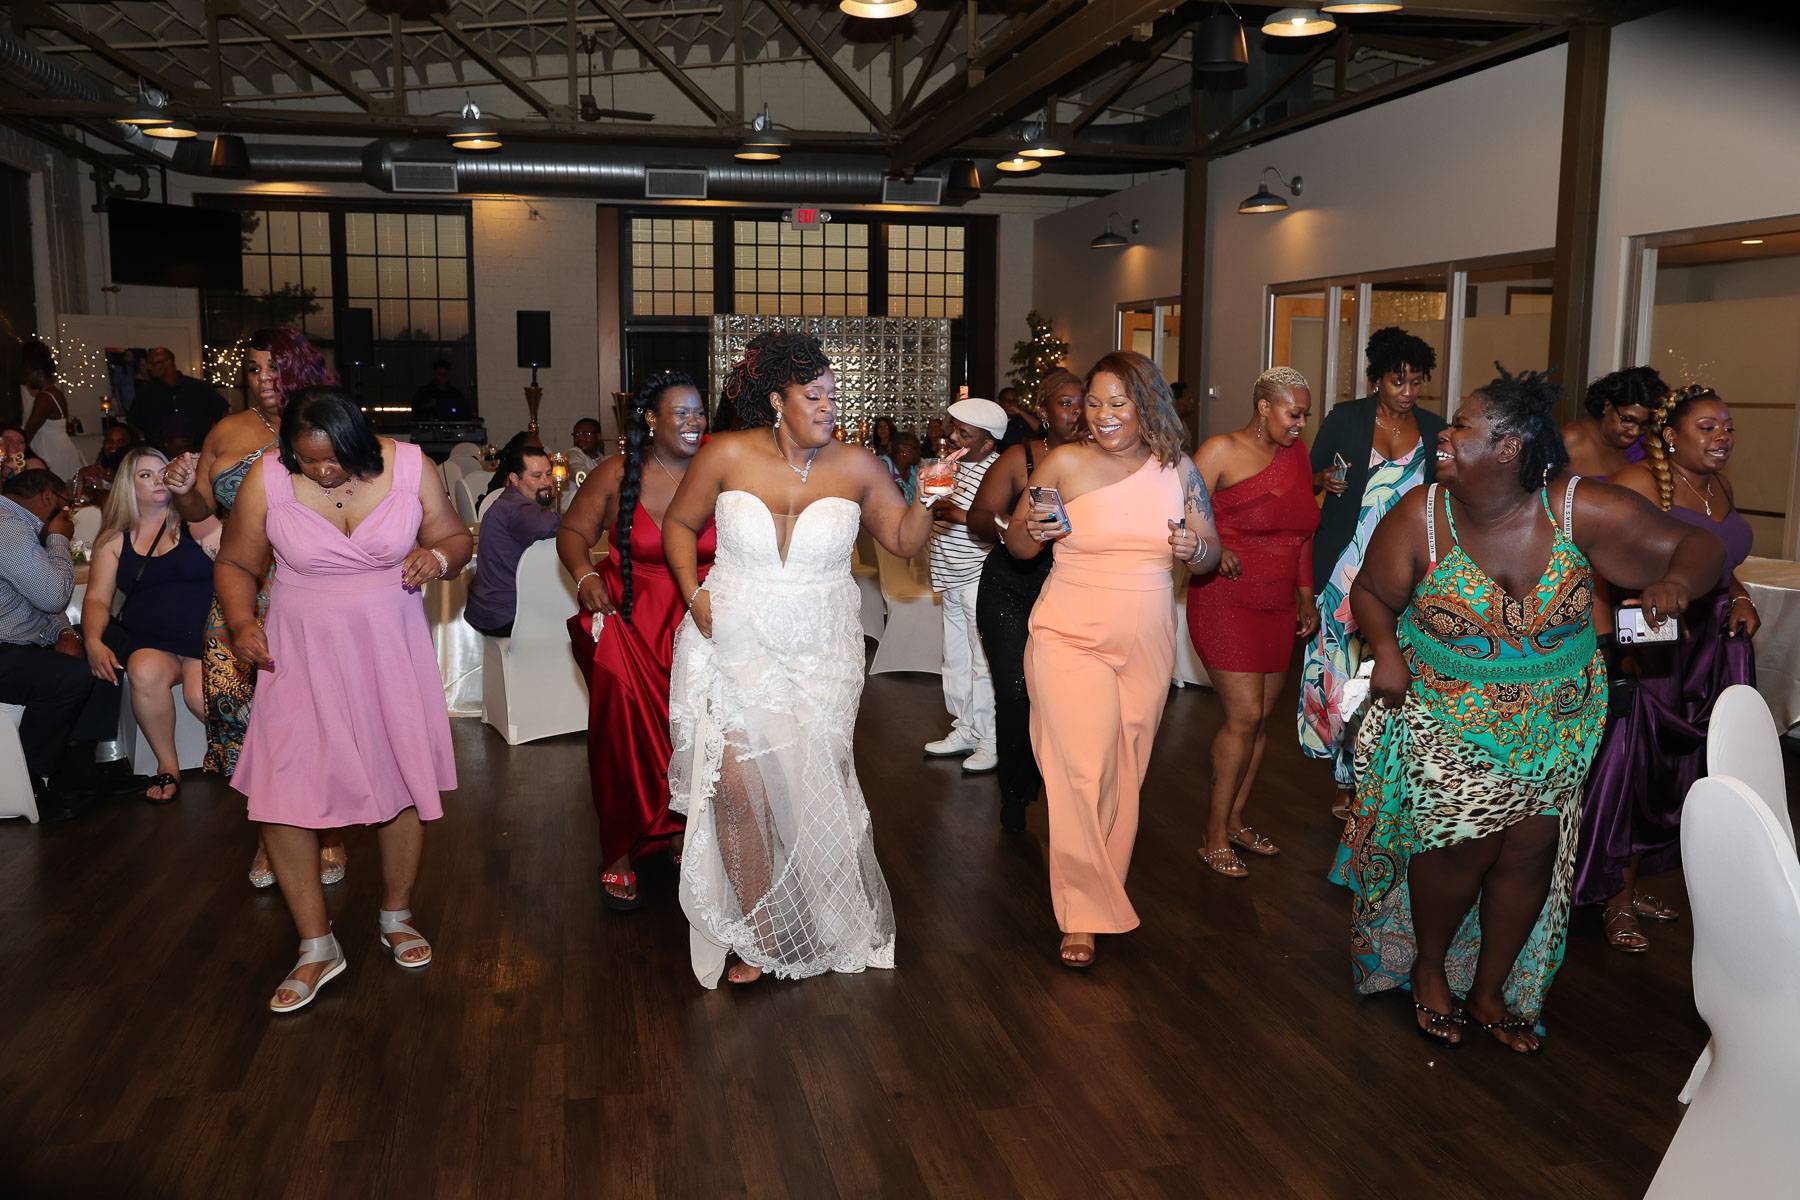 The bride dancing while holding a glass